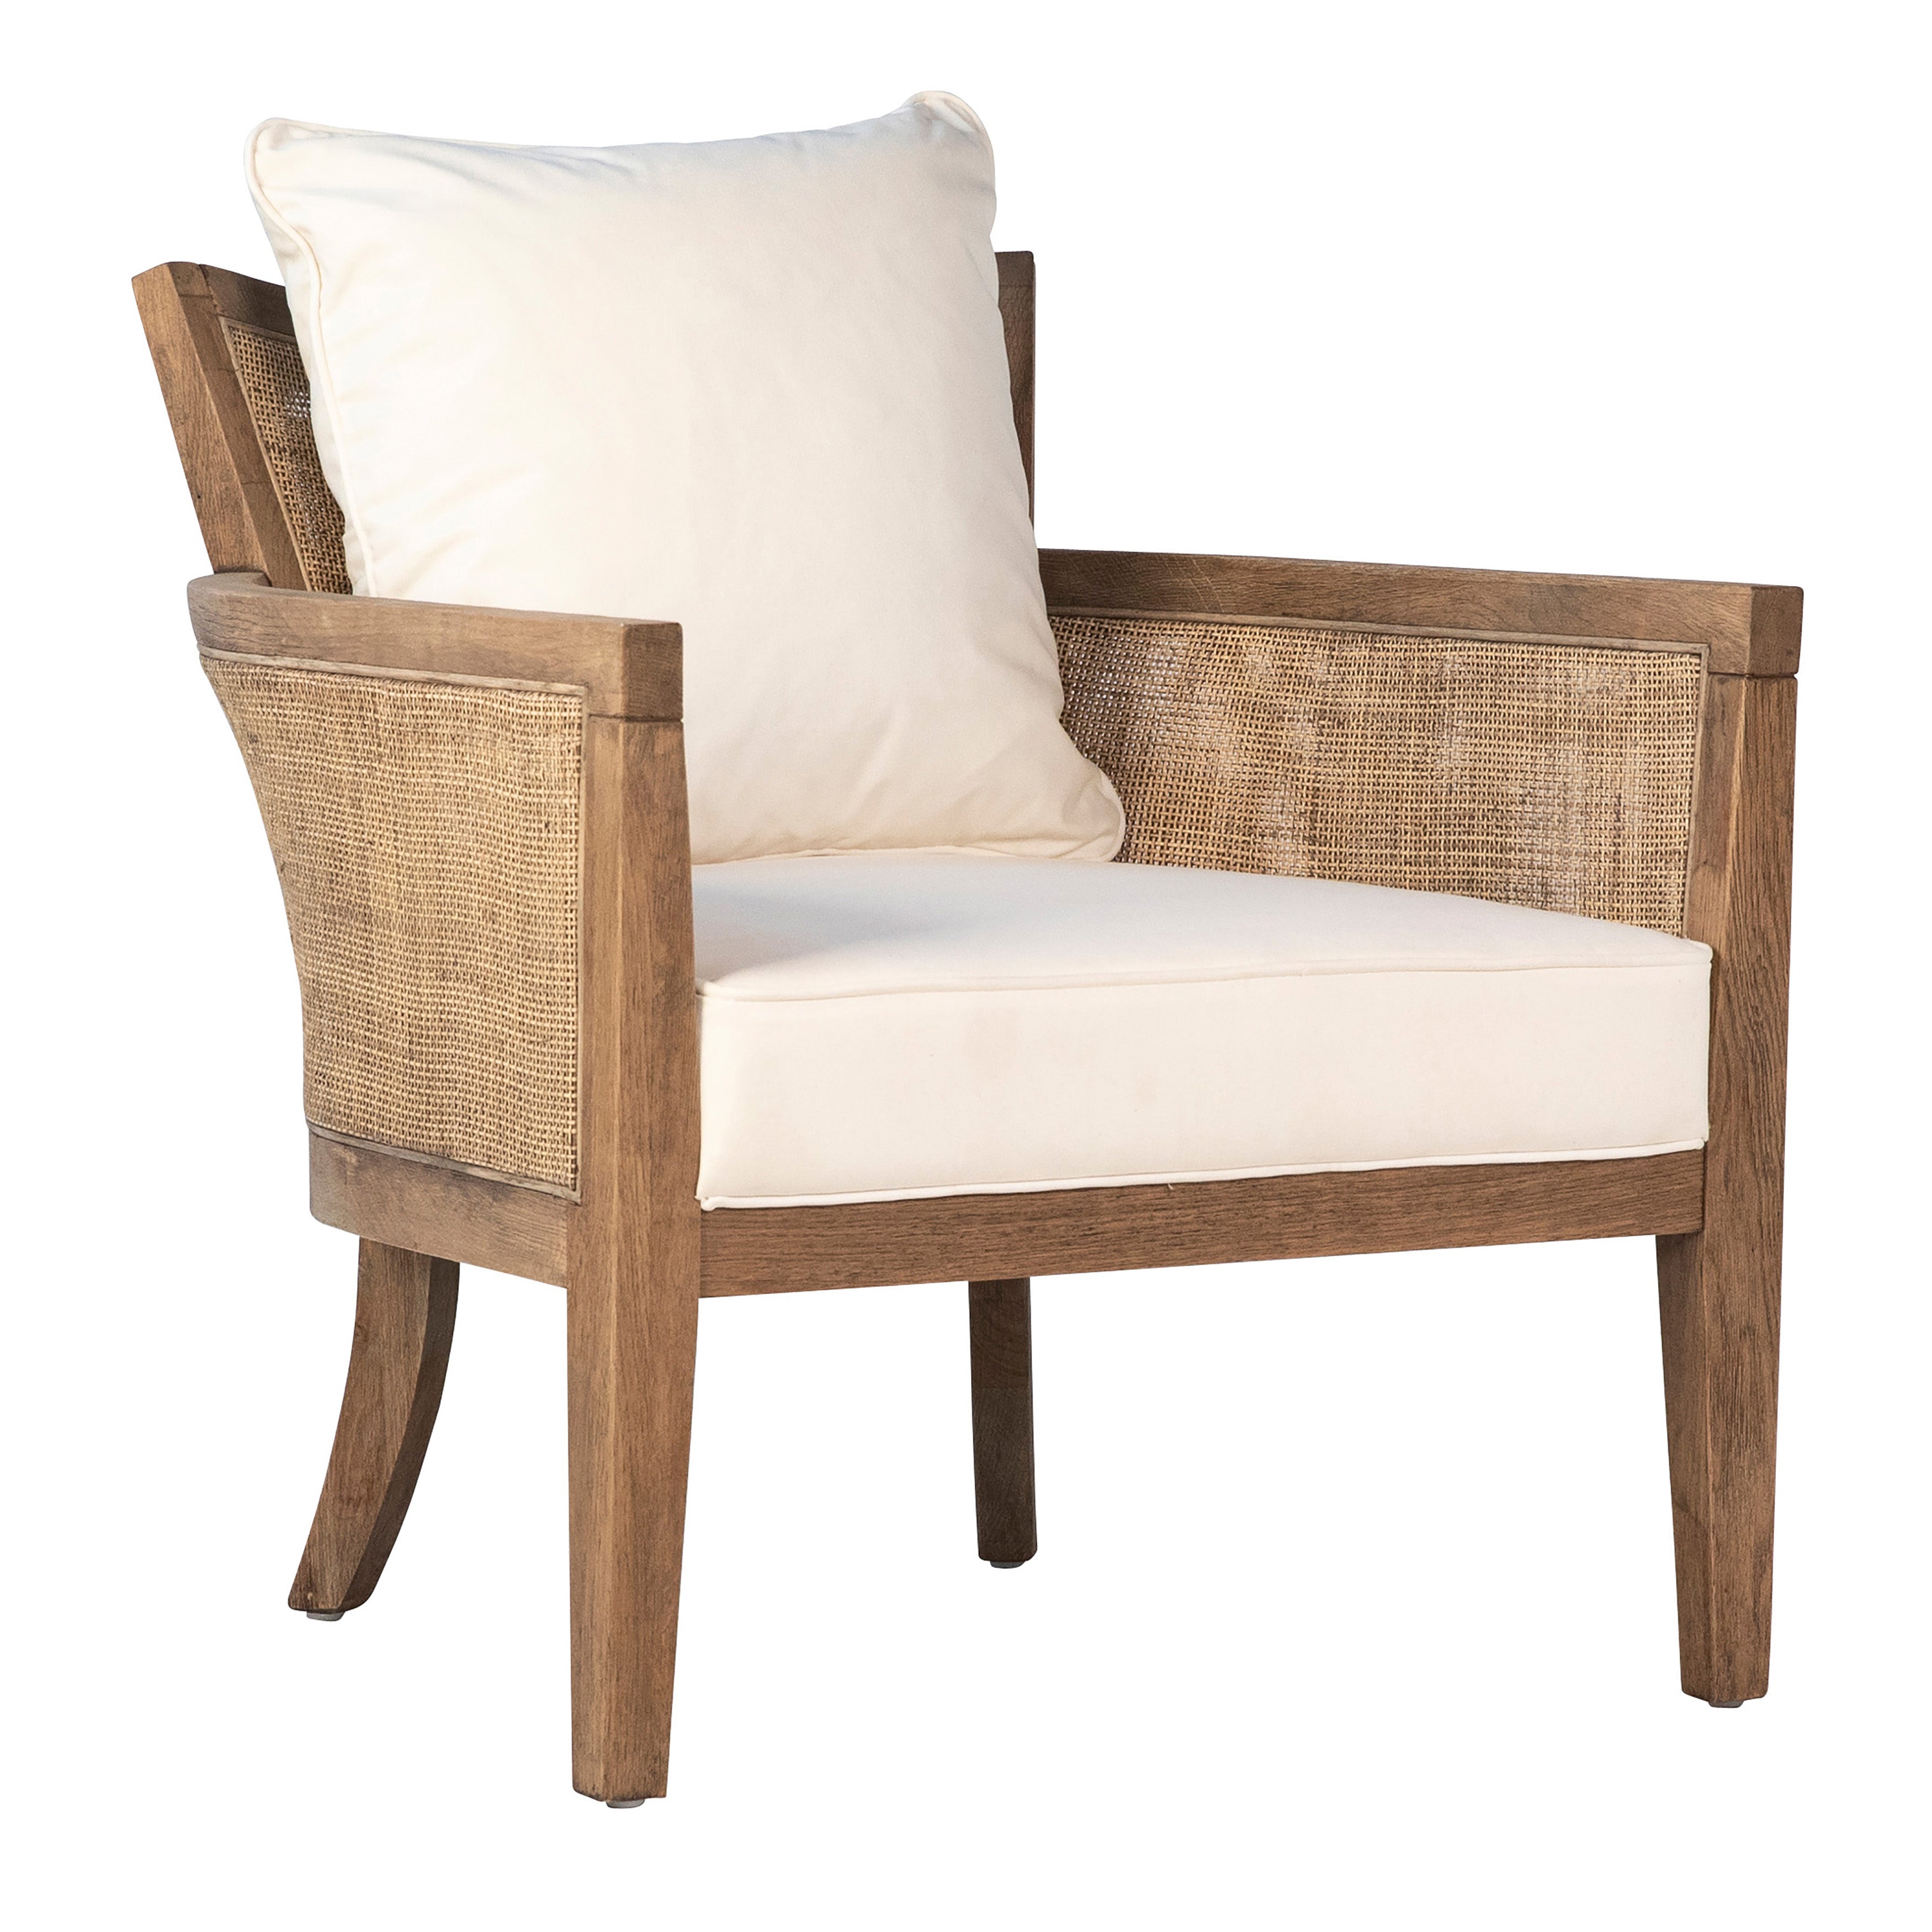 Made with mixed materials, this handsome tropical inspired Occasional Chair features a natural white, cotton blend cushioned seat and back rest supported by a natural oak wood frame wrapped in natural rattan panels.Depth : 31 in Amethyst Home provides interior design, new home construction design consulting, vintage area rugs, and lighting in the Portland metro area.